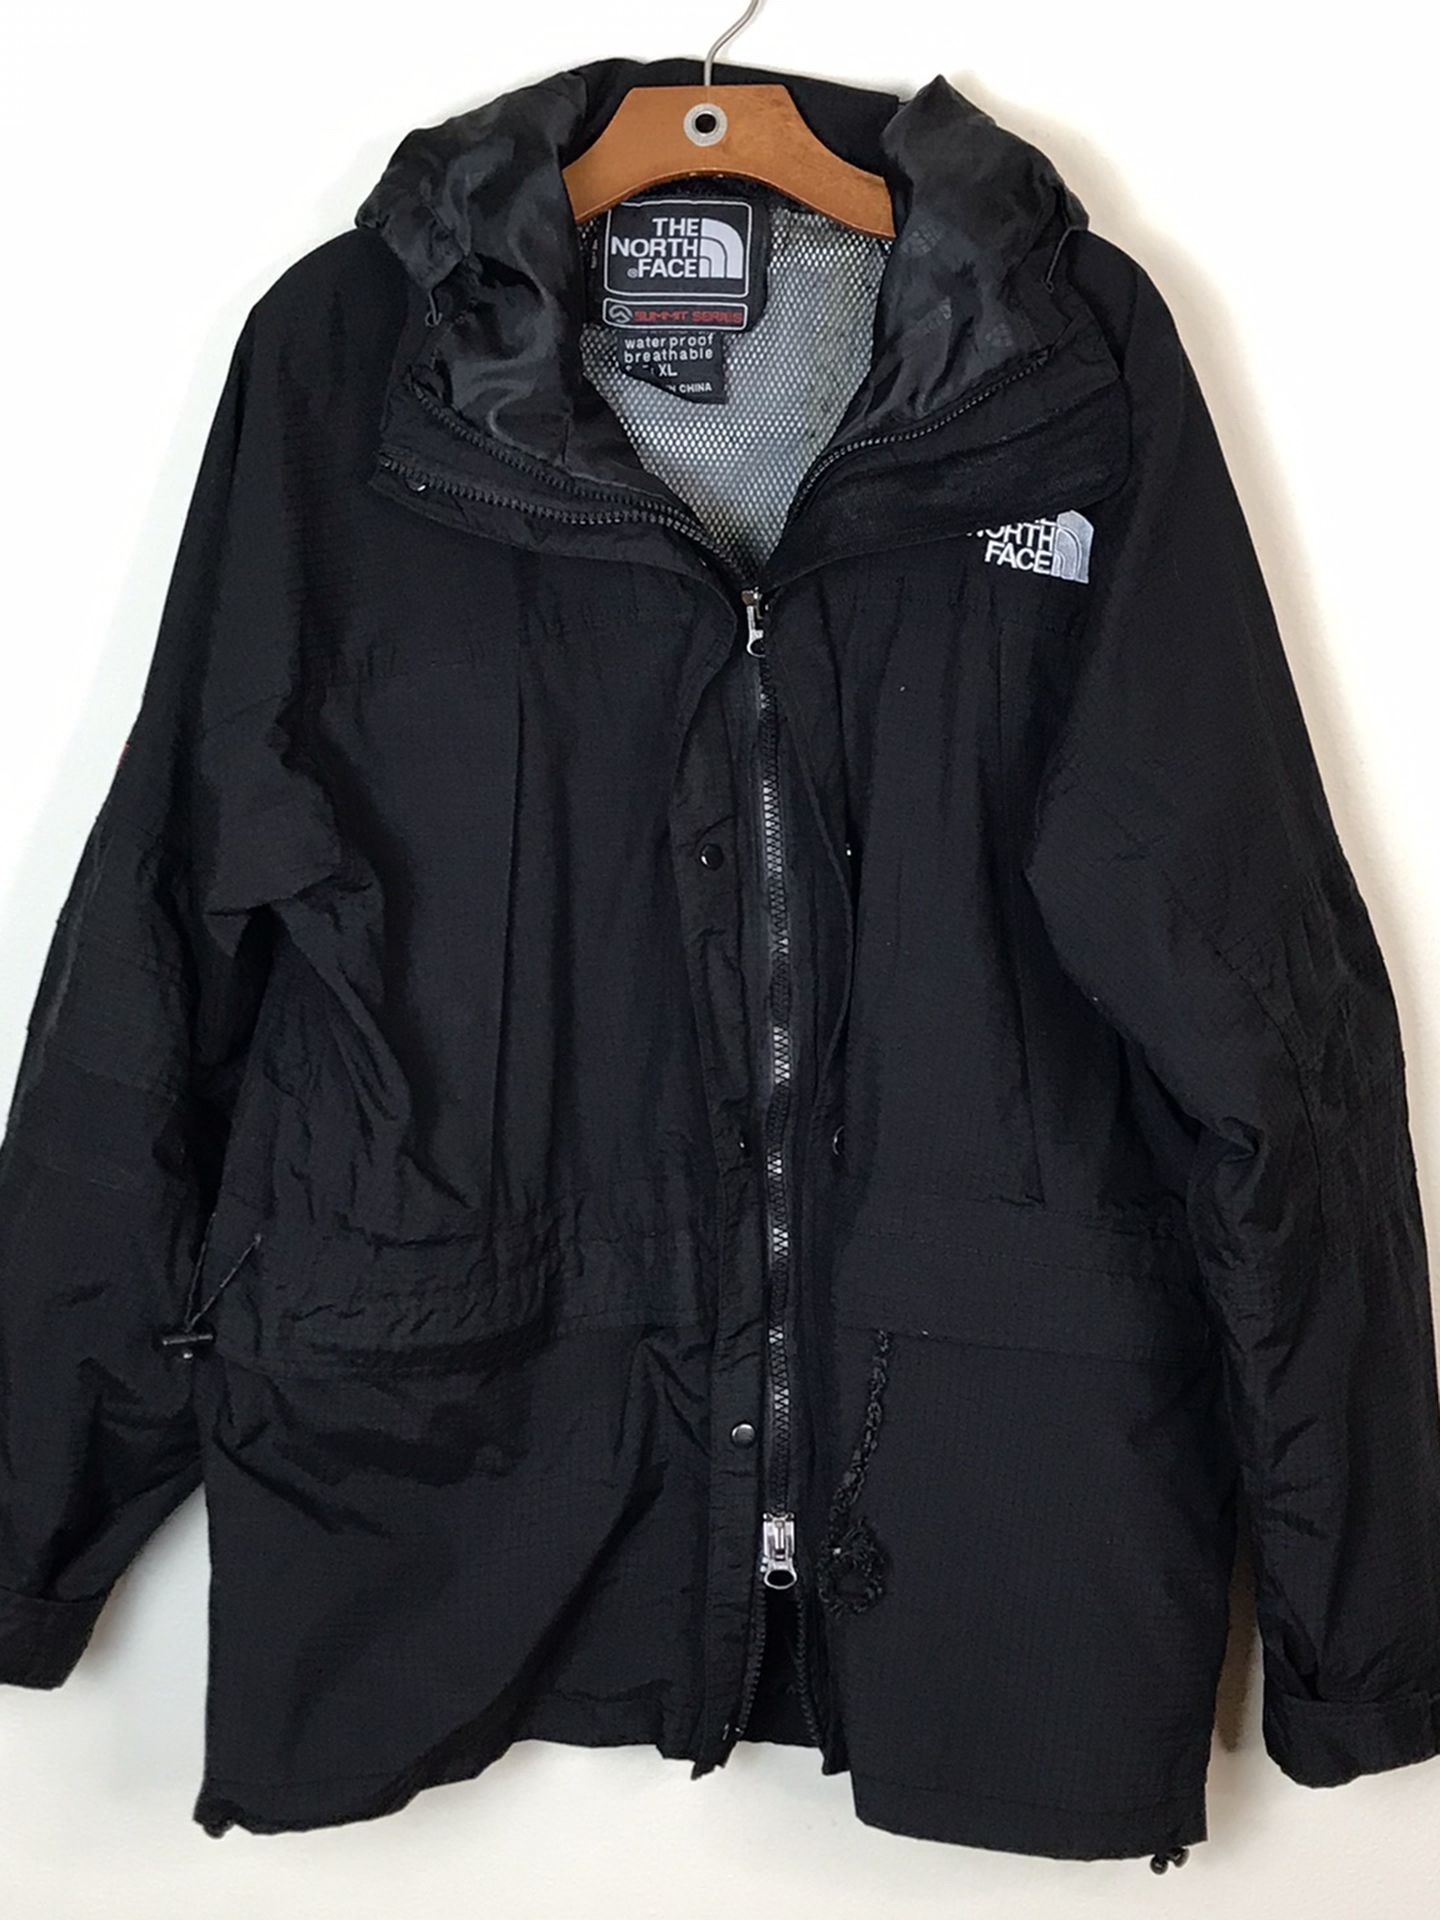 Vintage Black Summit Series Goretex North Face Parka Jacket waterproof XLARGE Disclaimer** Bottom box f the inside zíper it’s loose and fully functio